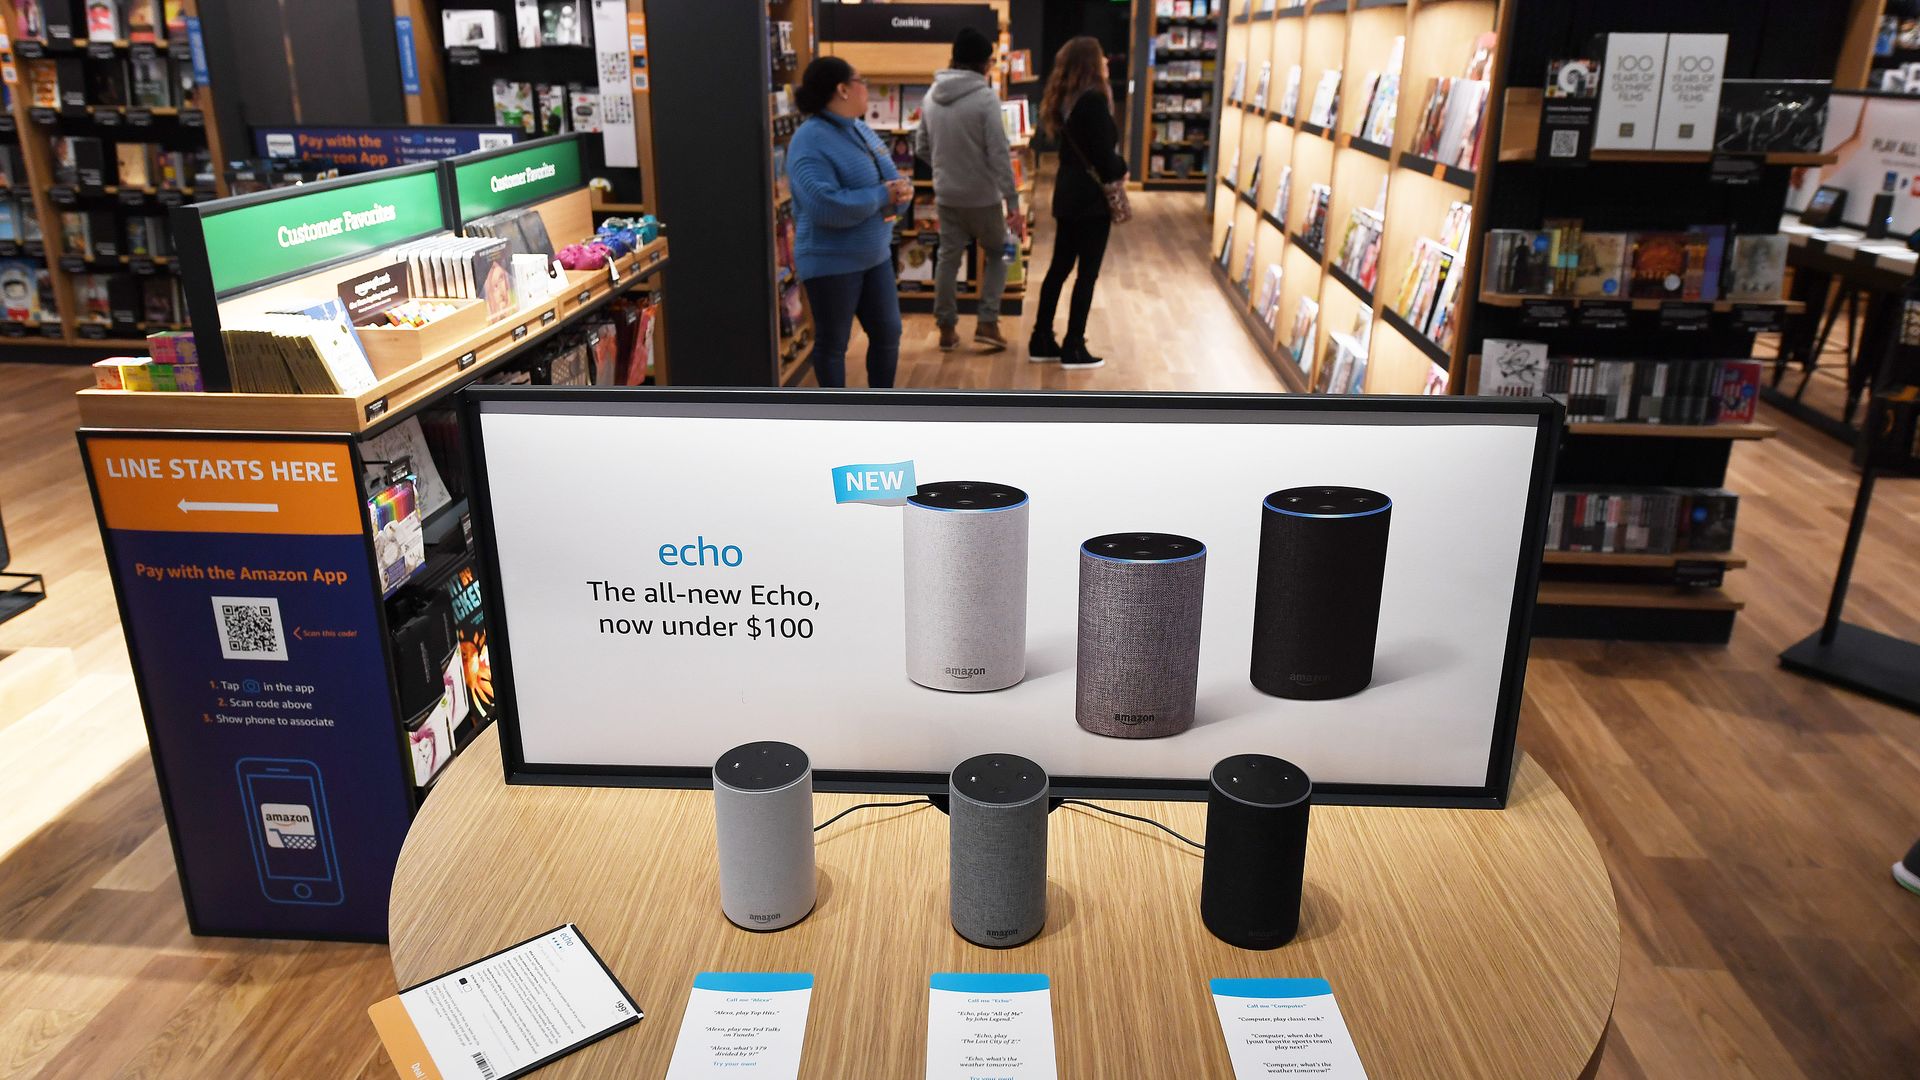 Photo of Amazon Echo devices on sale in an Amazon store.